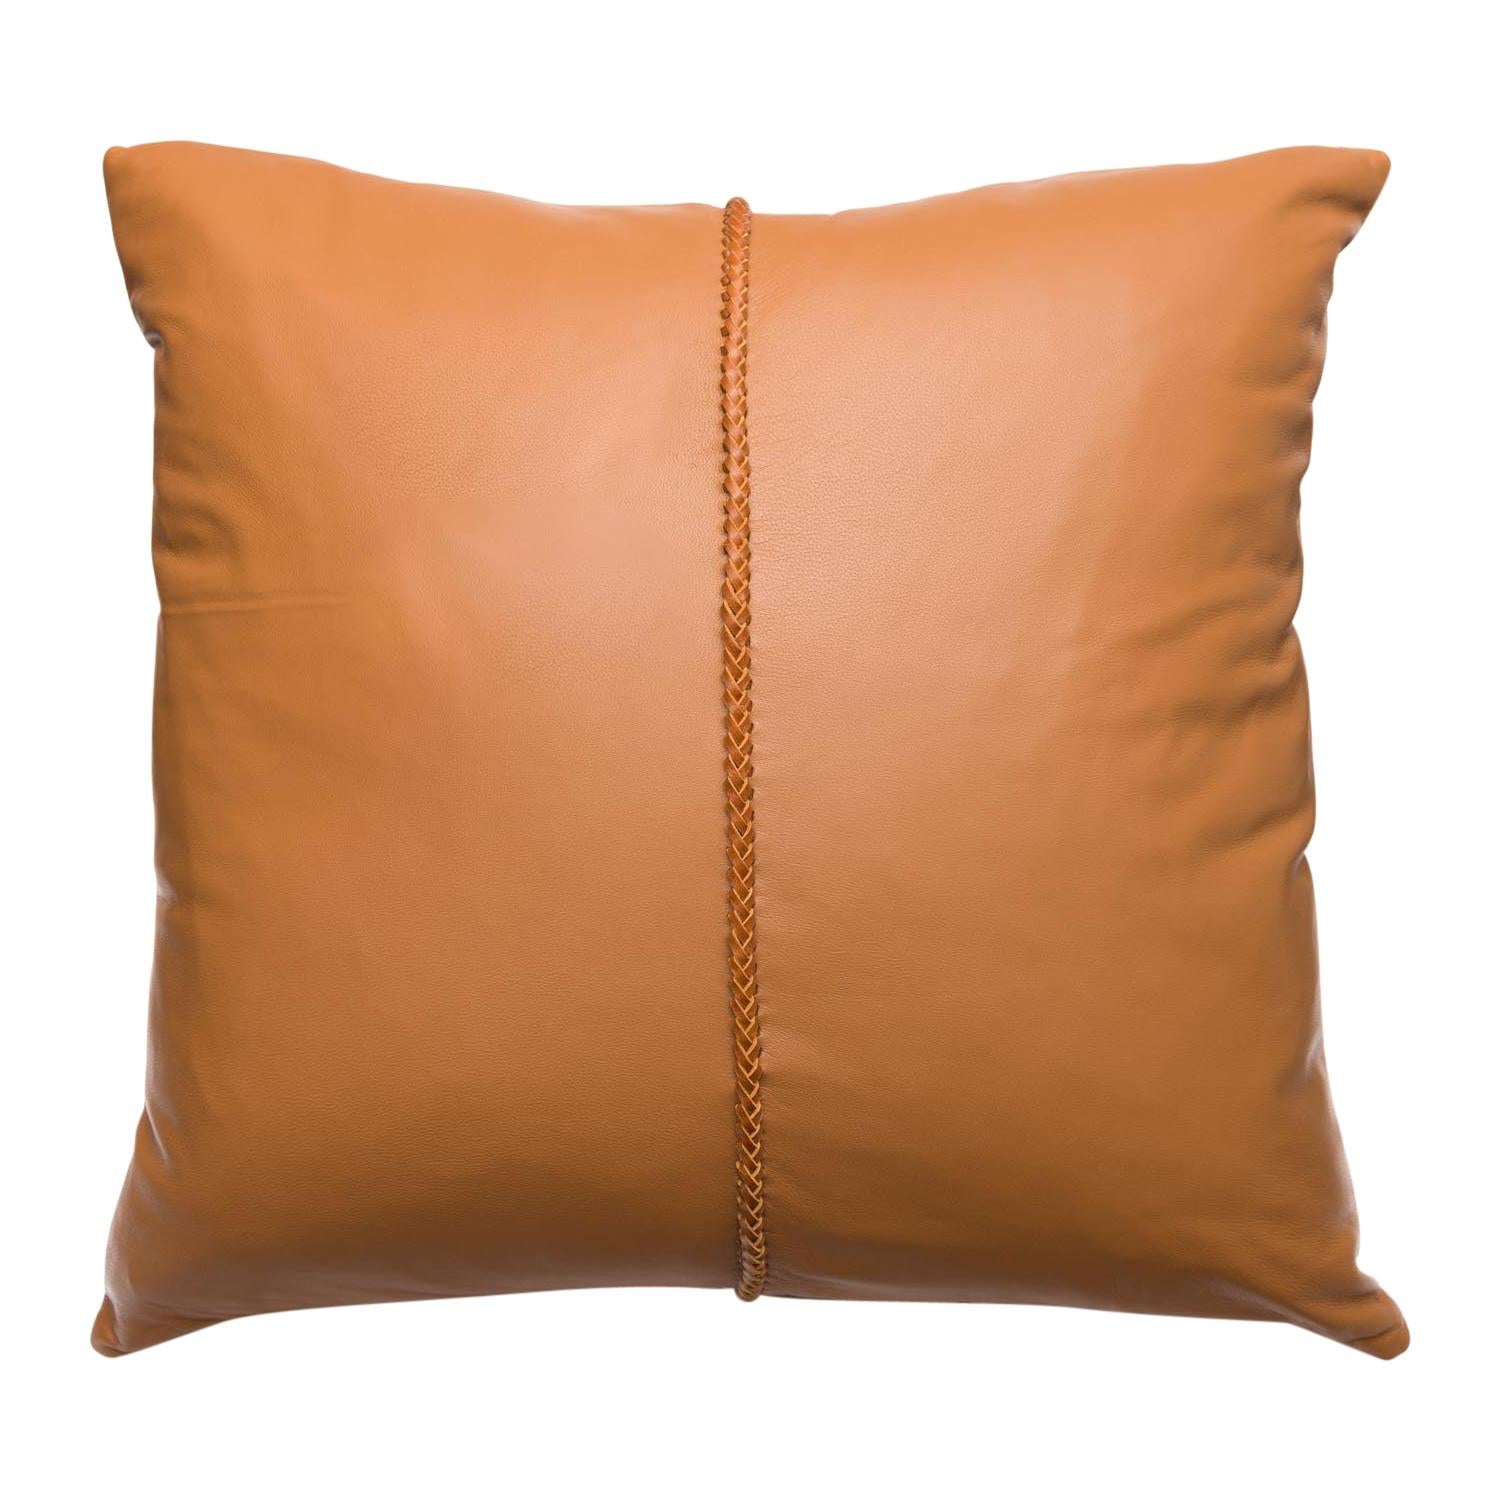 Tan Leather Pillow with Cross Stitch